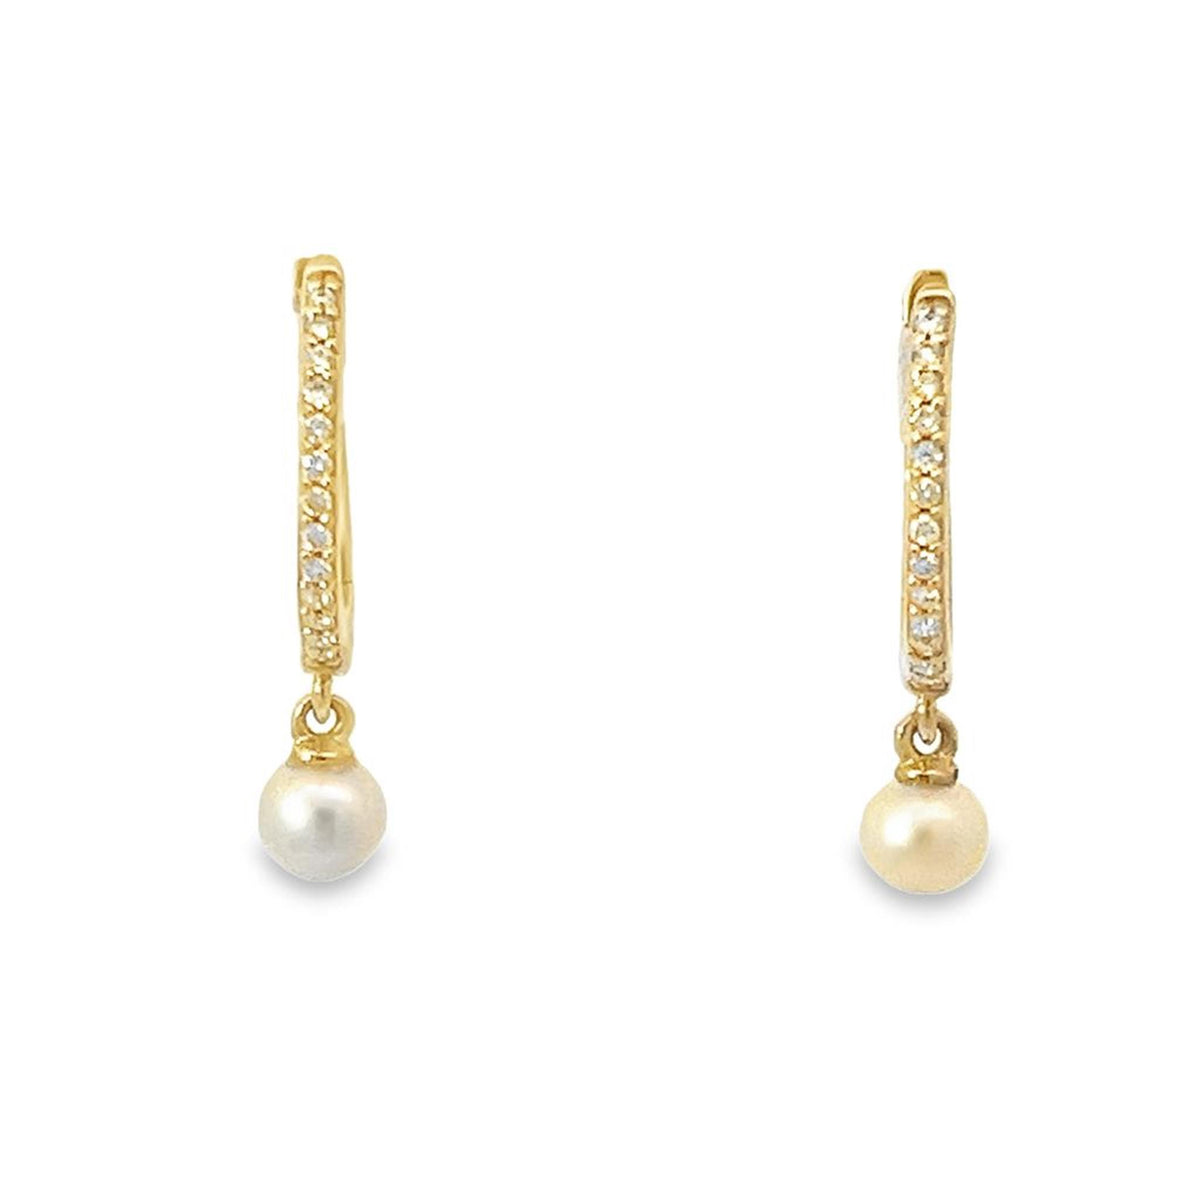 14Kt Yellow Gold Round Hoop Earrings with a Pearl Dangle